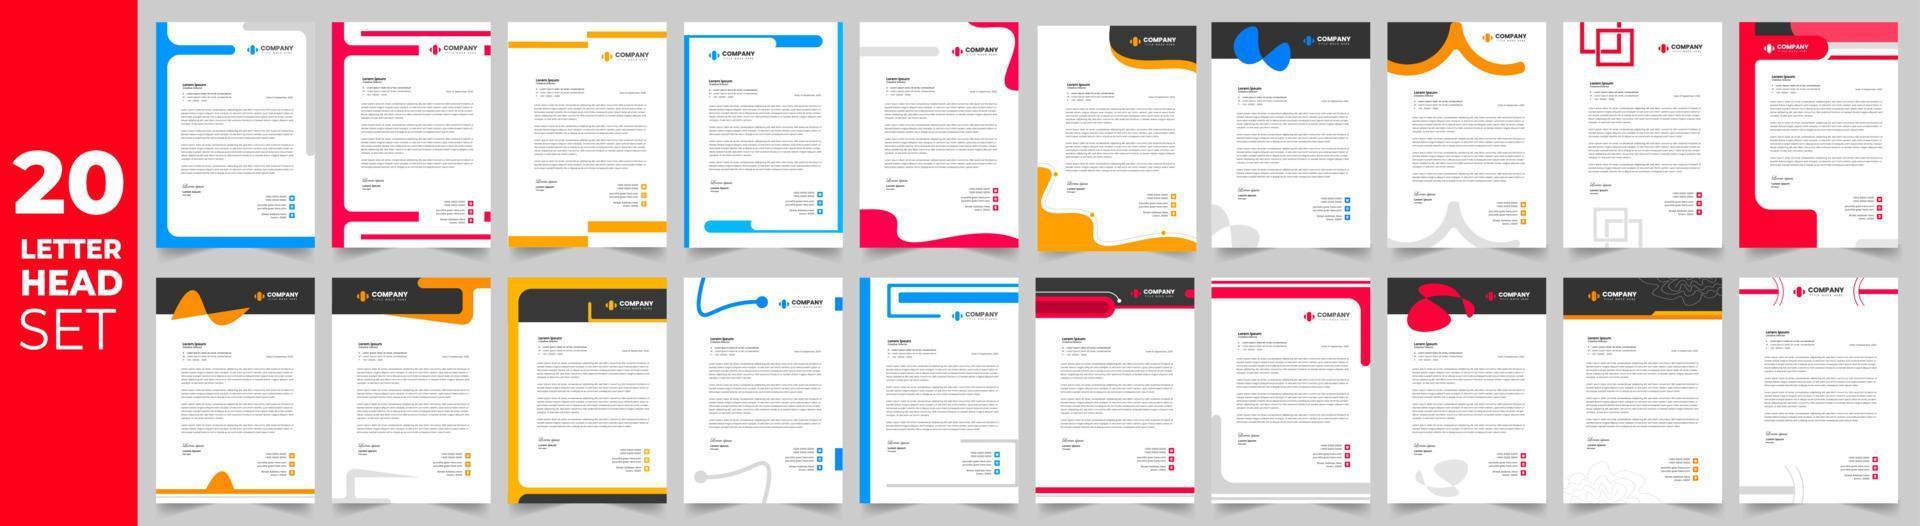 corporate business proposal letterhead design template set with green, red, blue and yellow color. business letterhead mega set. business letter head mega bundle. vector